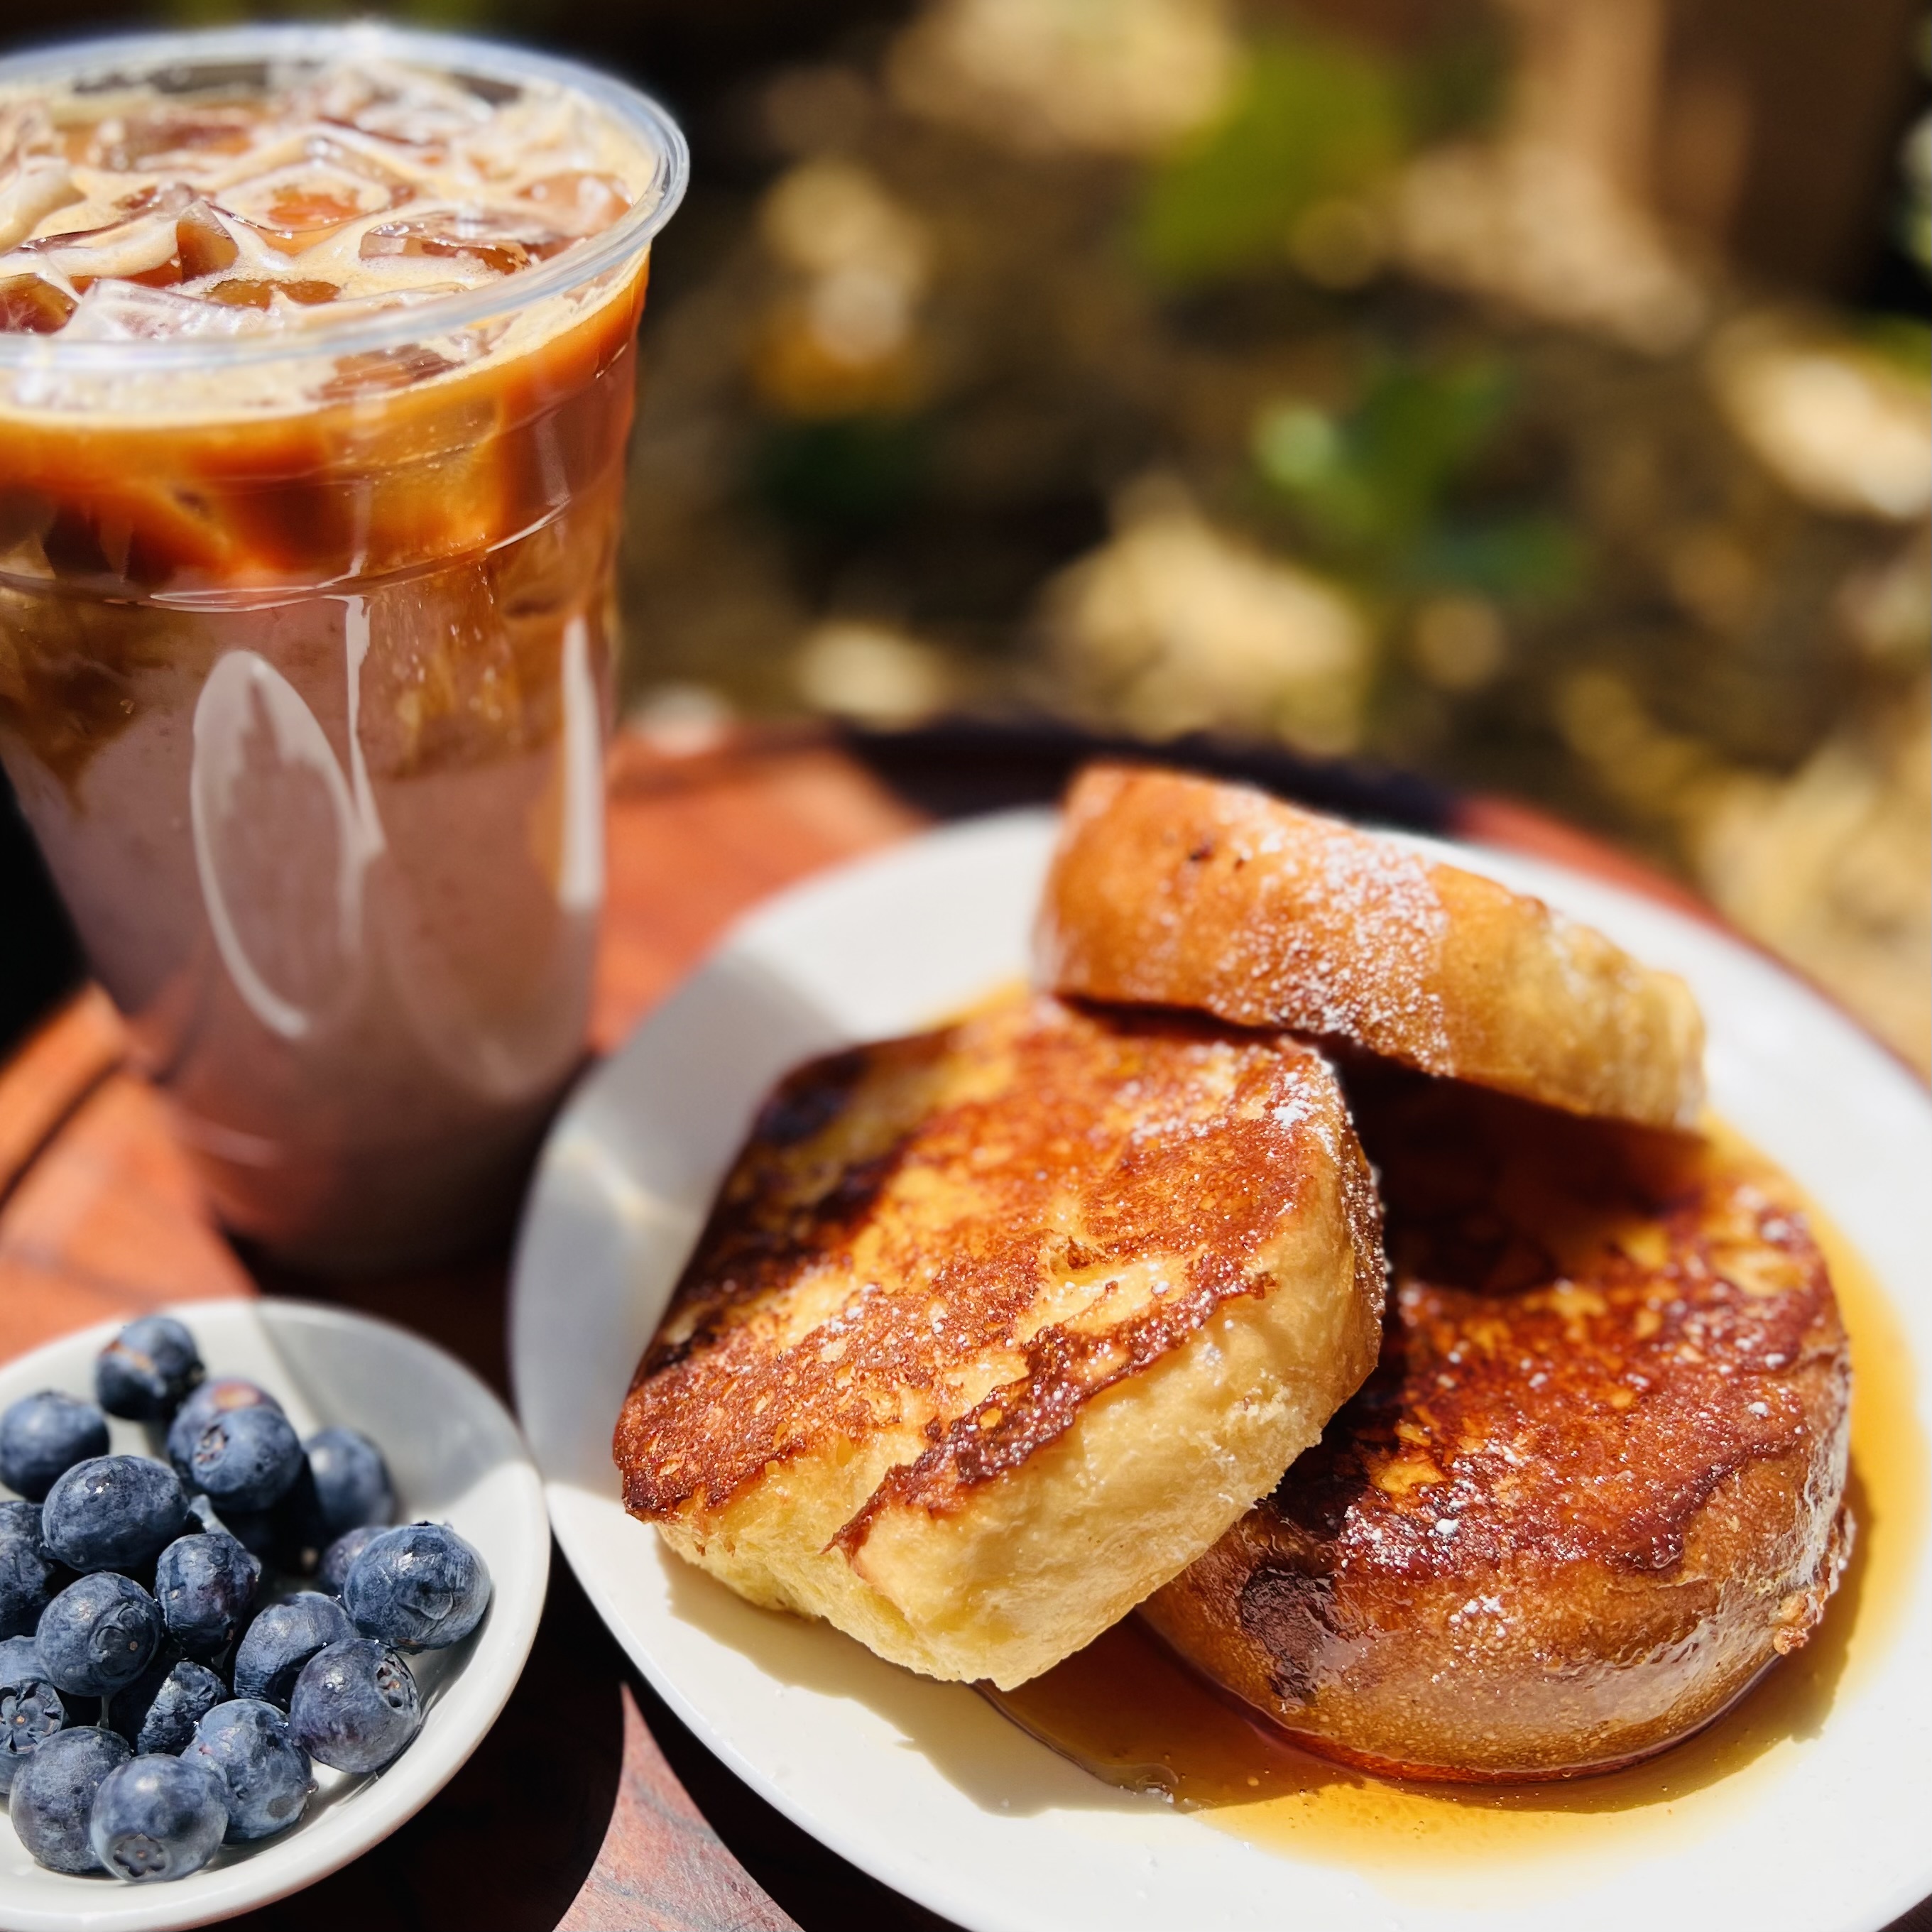 French toast with maple syrup, blueberries, and a cup of iced coffee